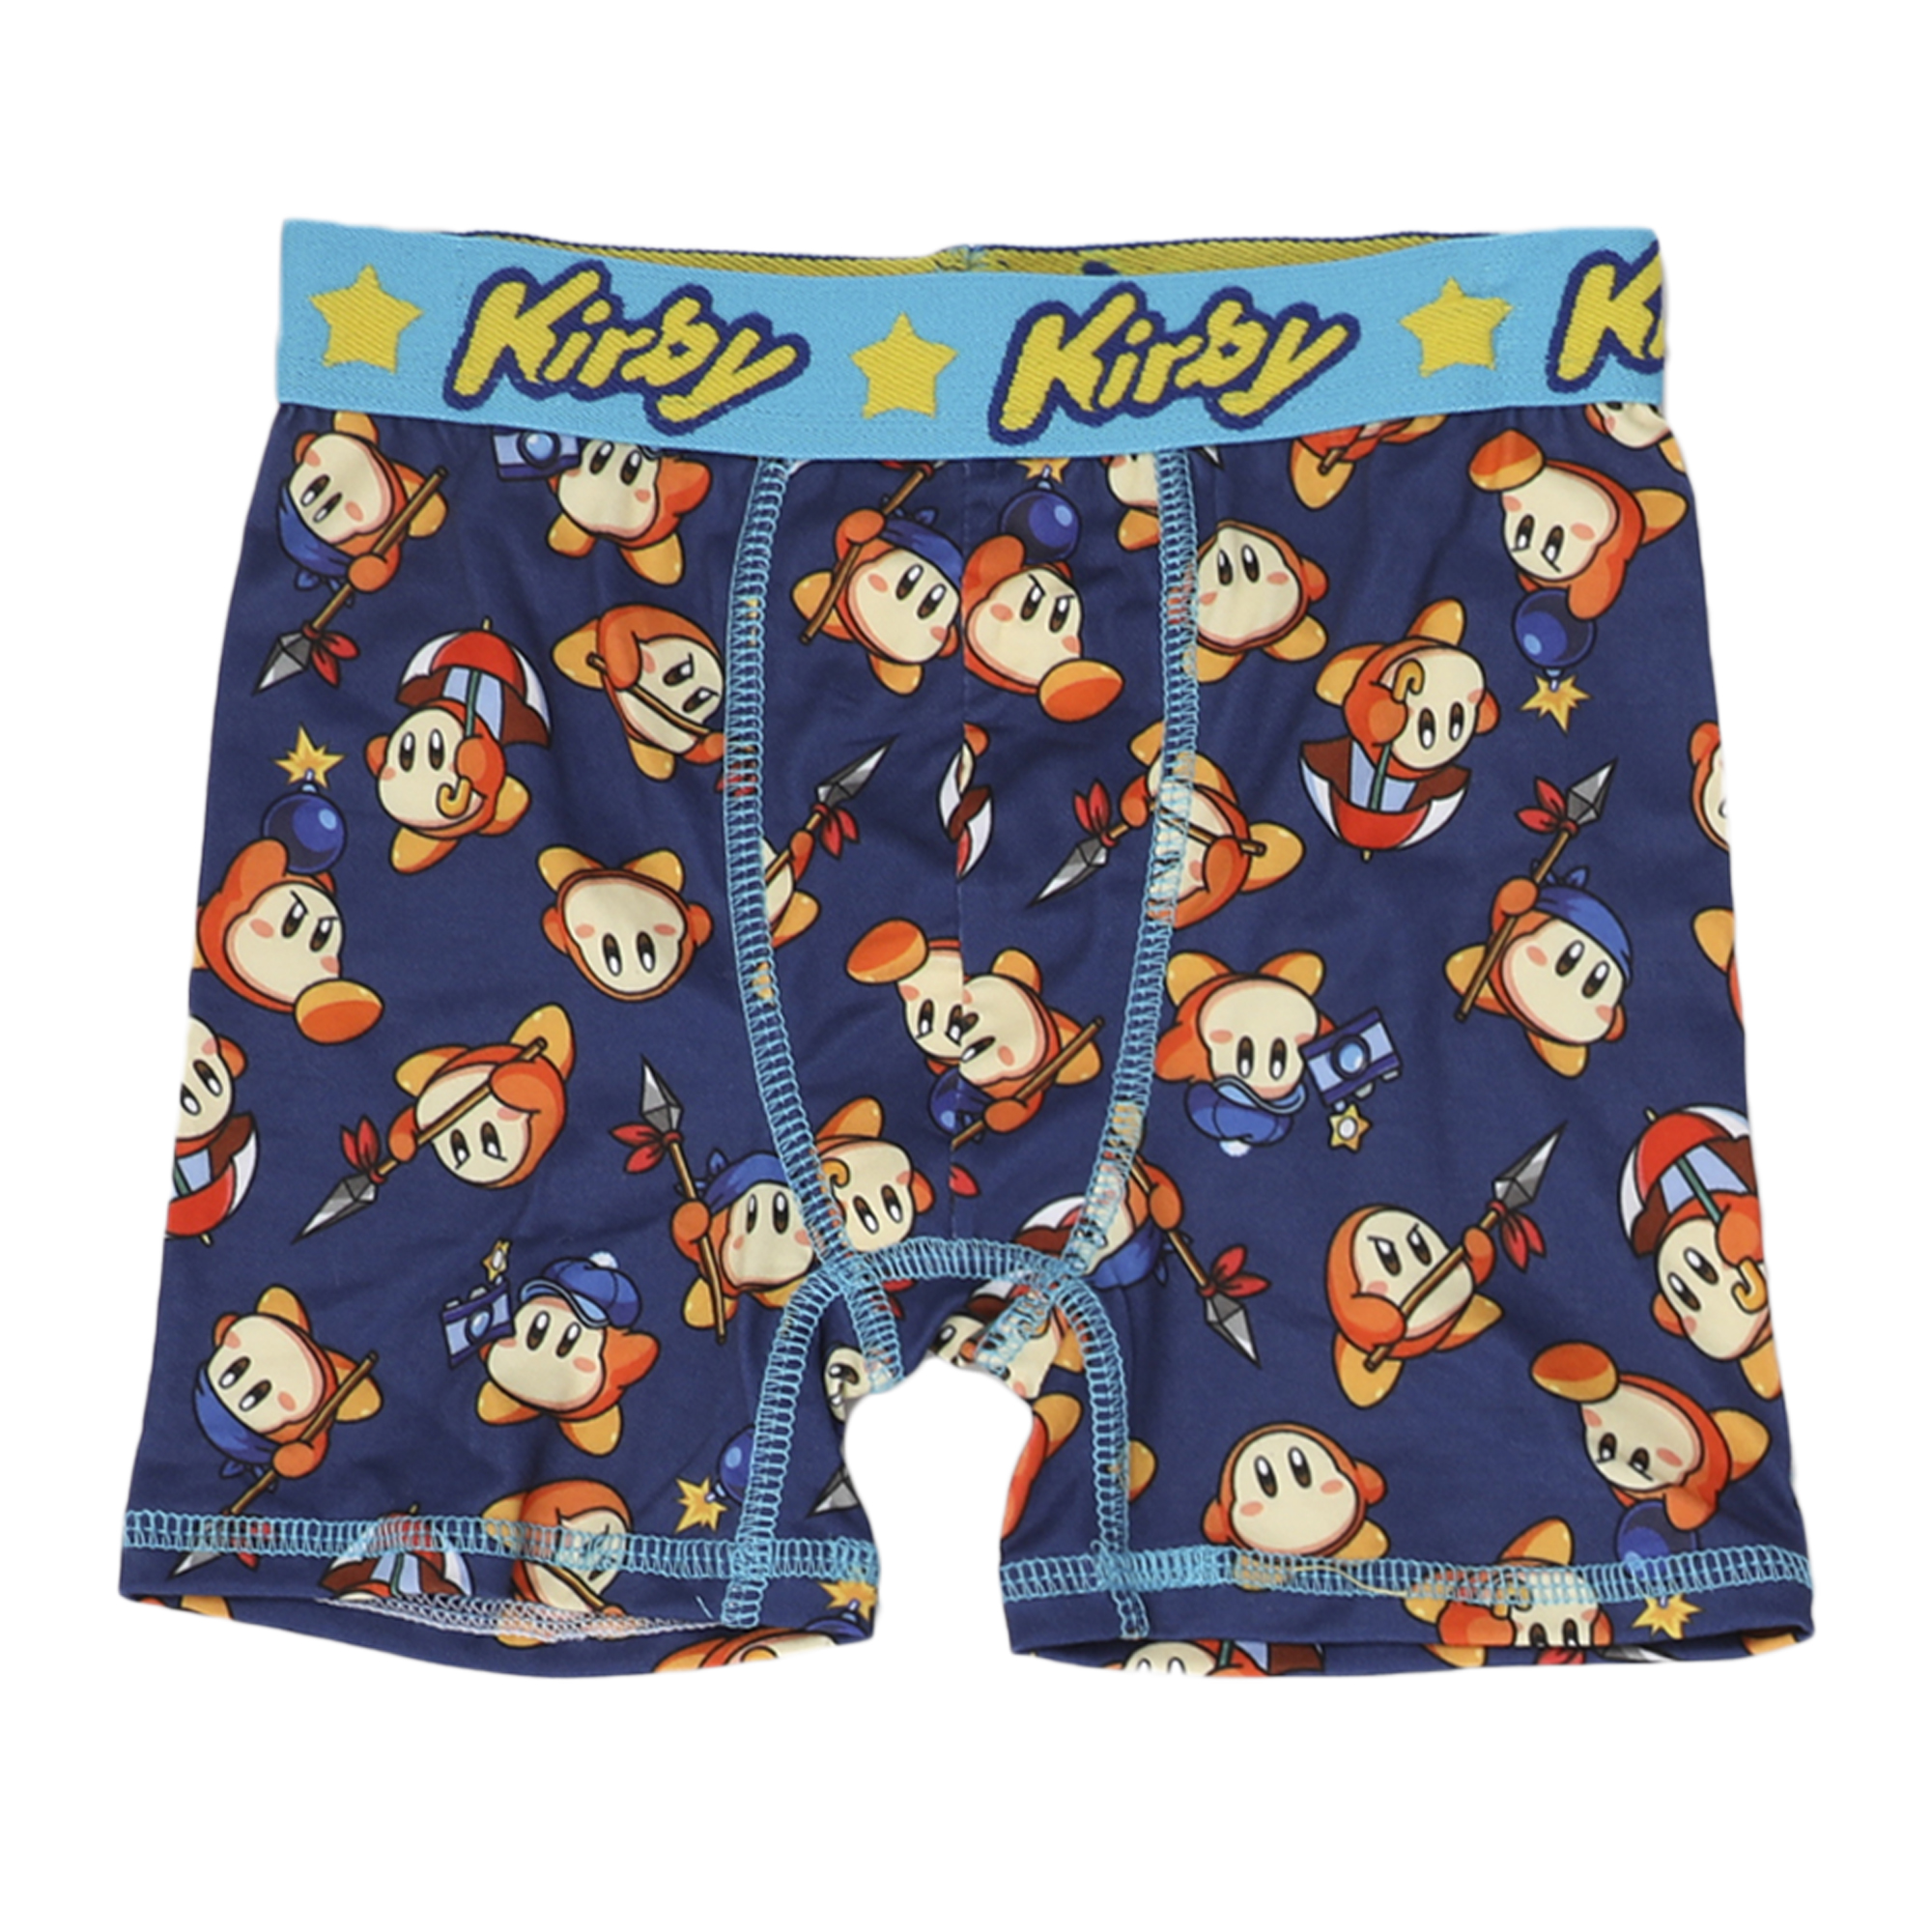 Kirby Characters & Power Ups 4-Pack Boy's Boxer Briefs-4 - image 2 of 5